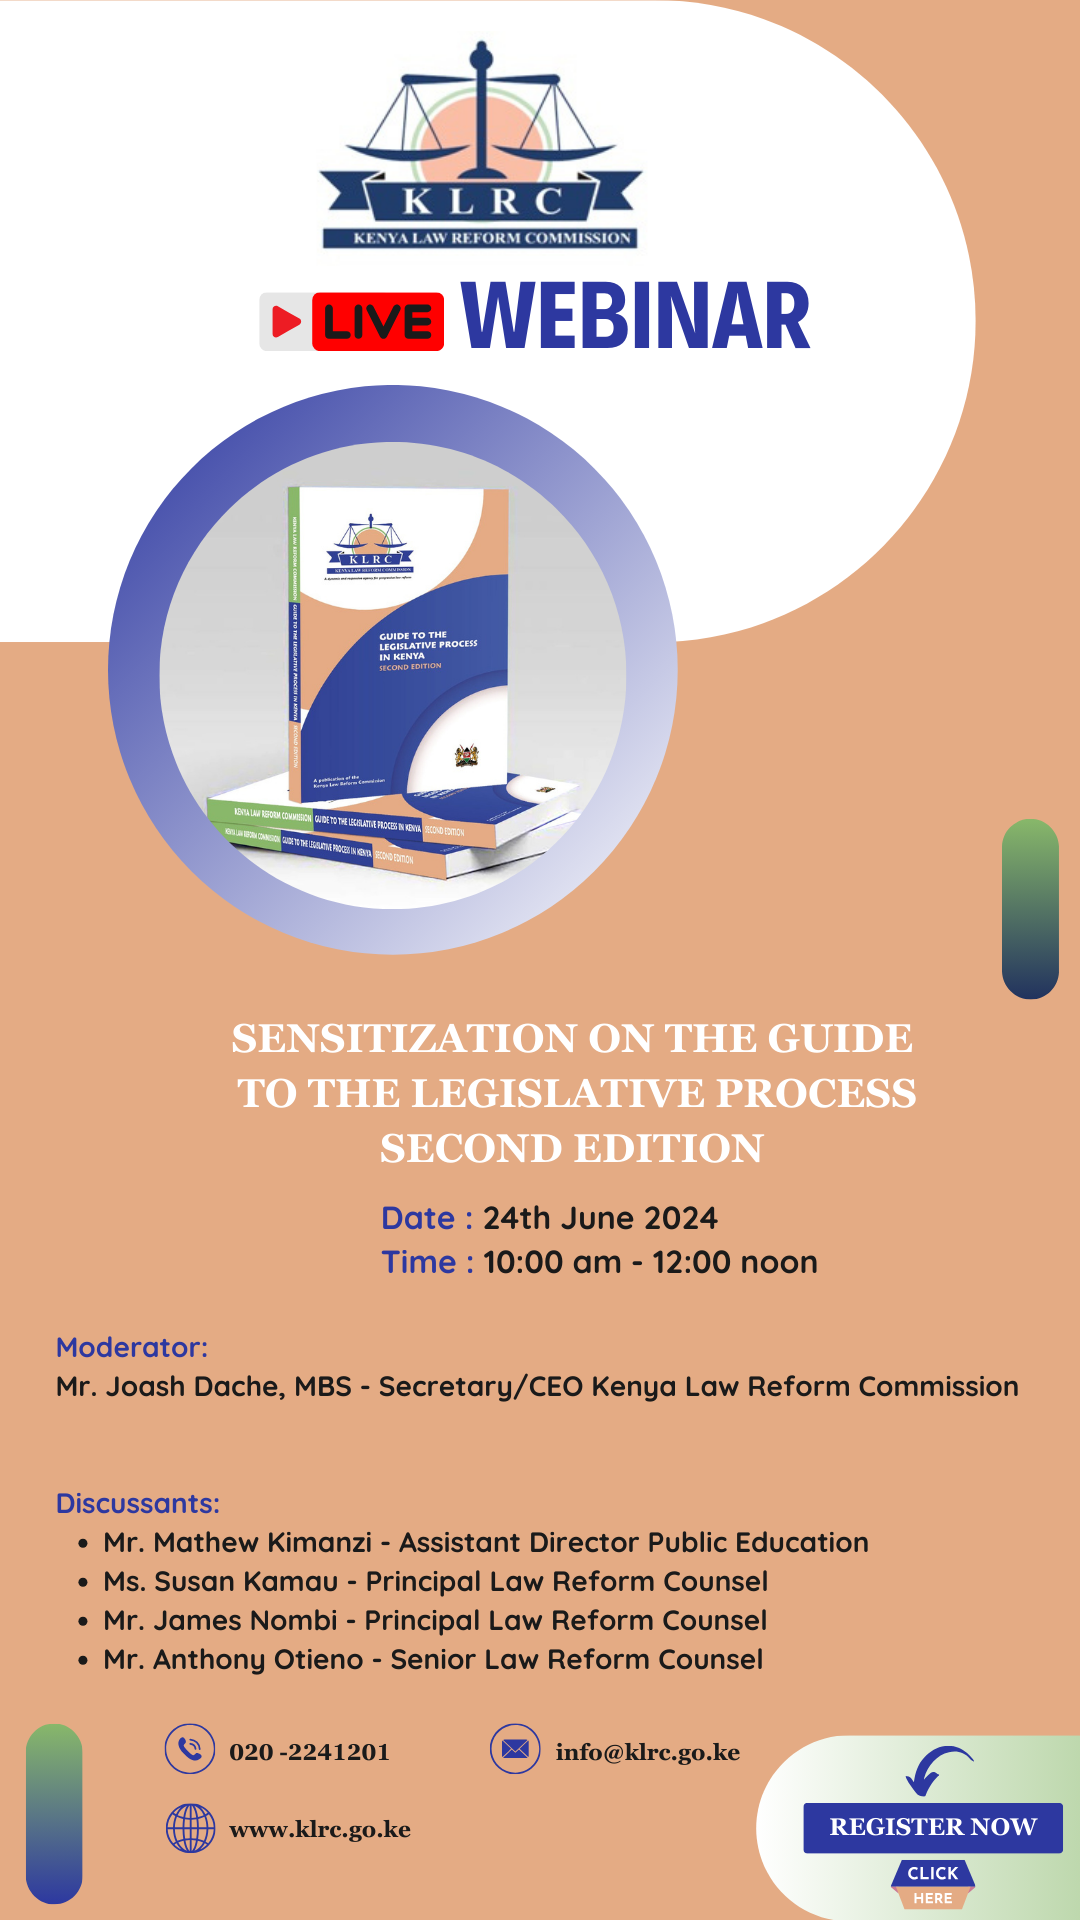 Senisitization to The Guide on Legislative Process in Kenya Second Edition flyer 